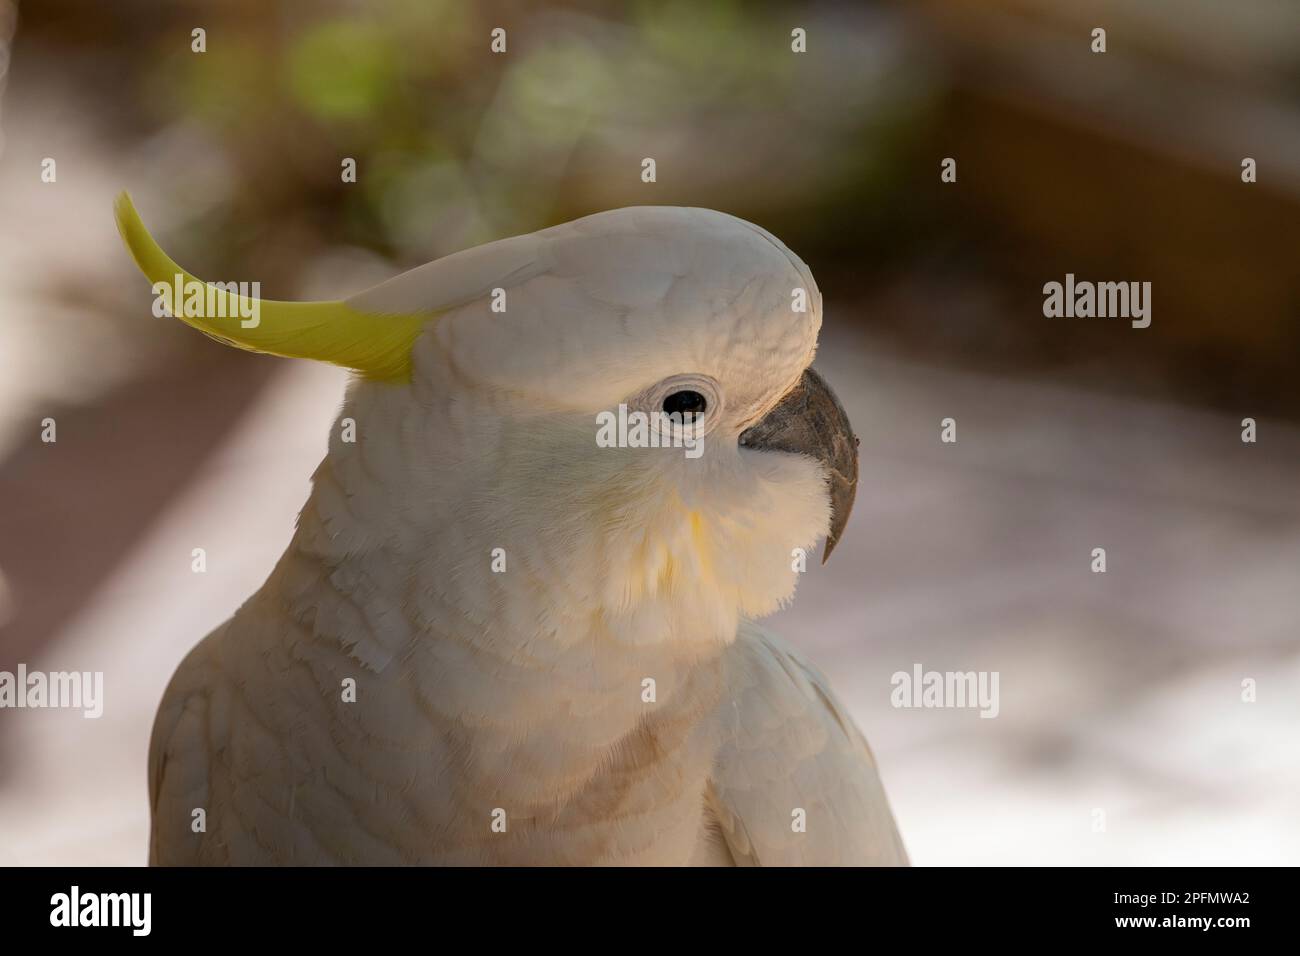 yellow crested Cockatoo portrait with soft background. Stock Photo